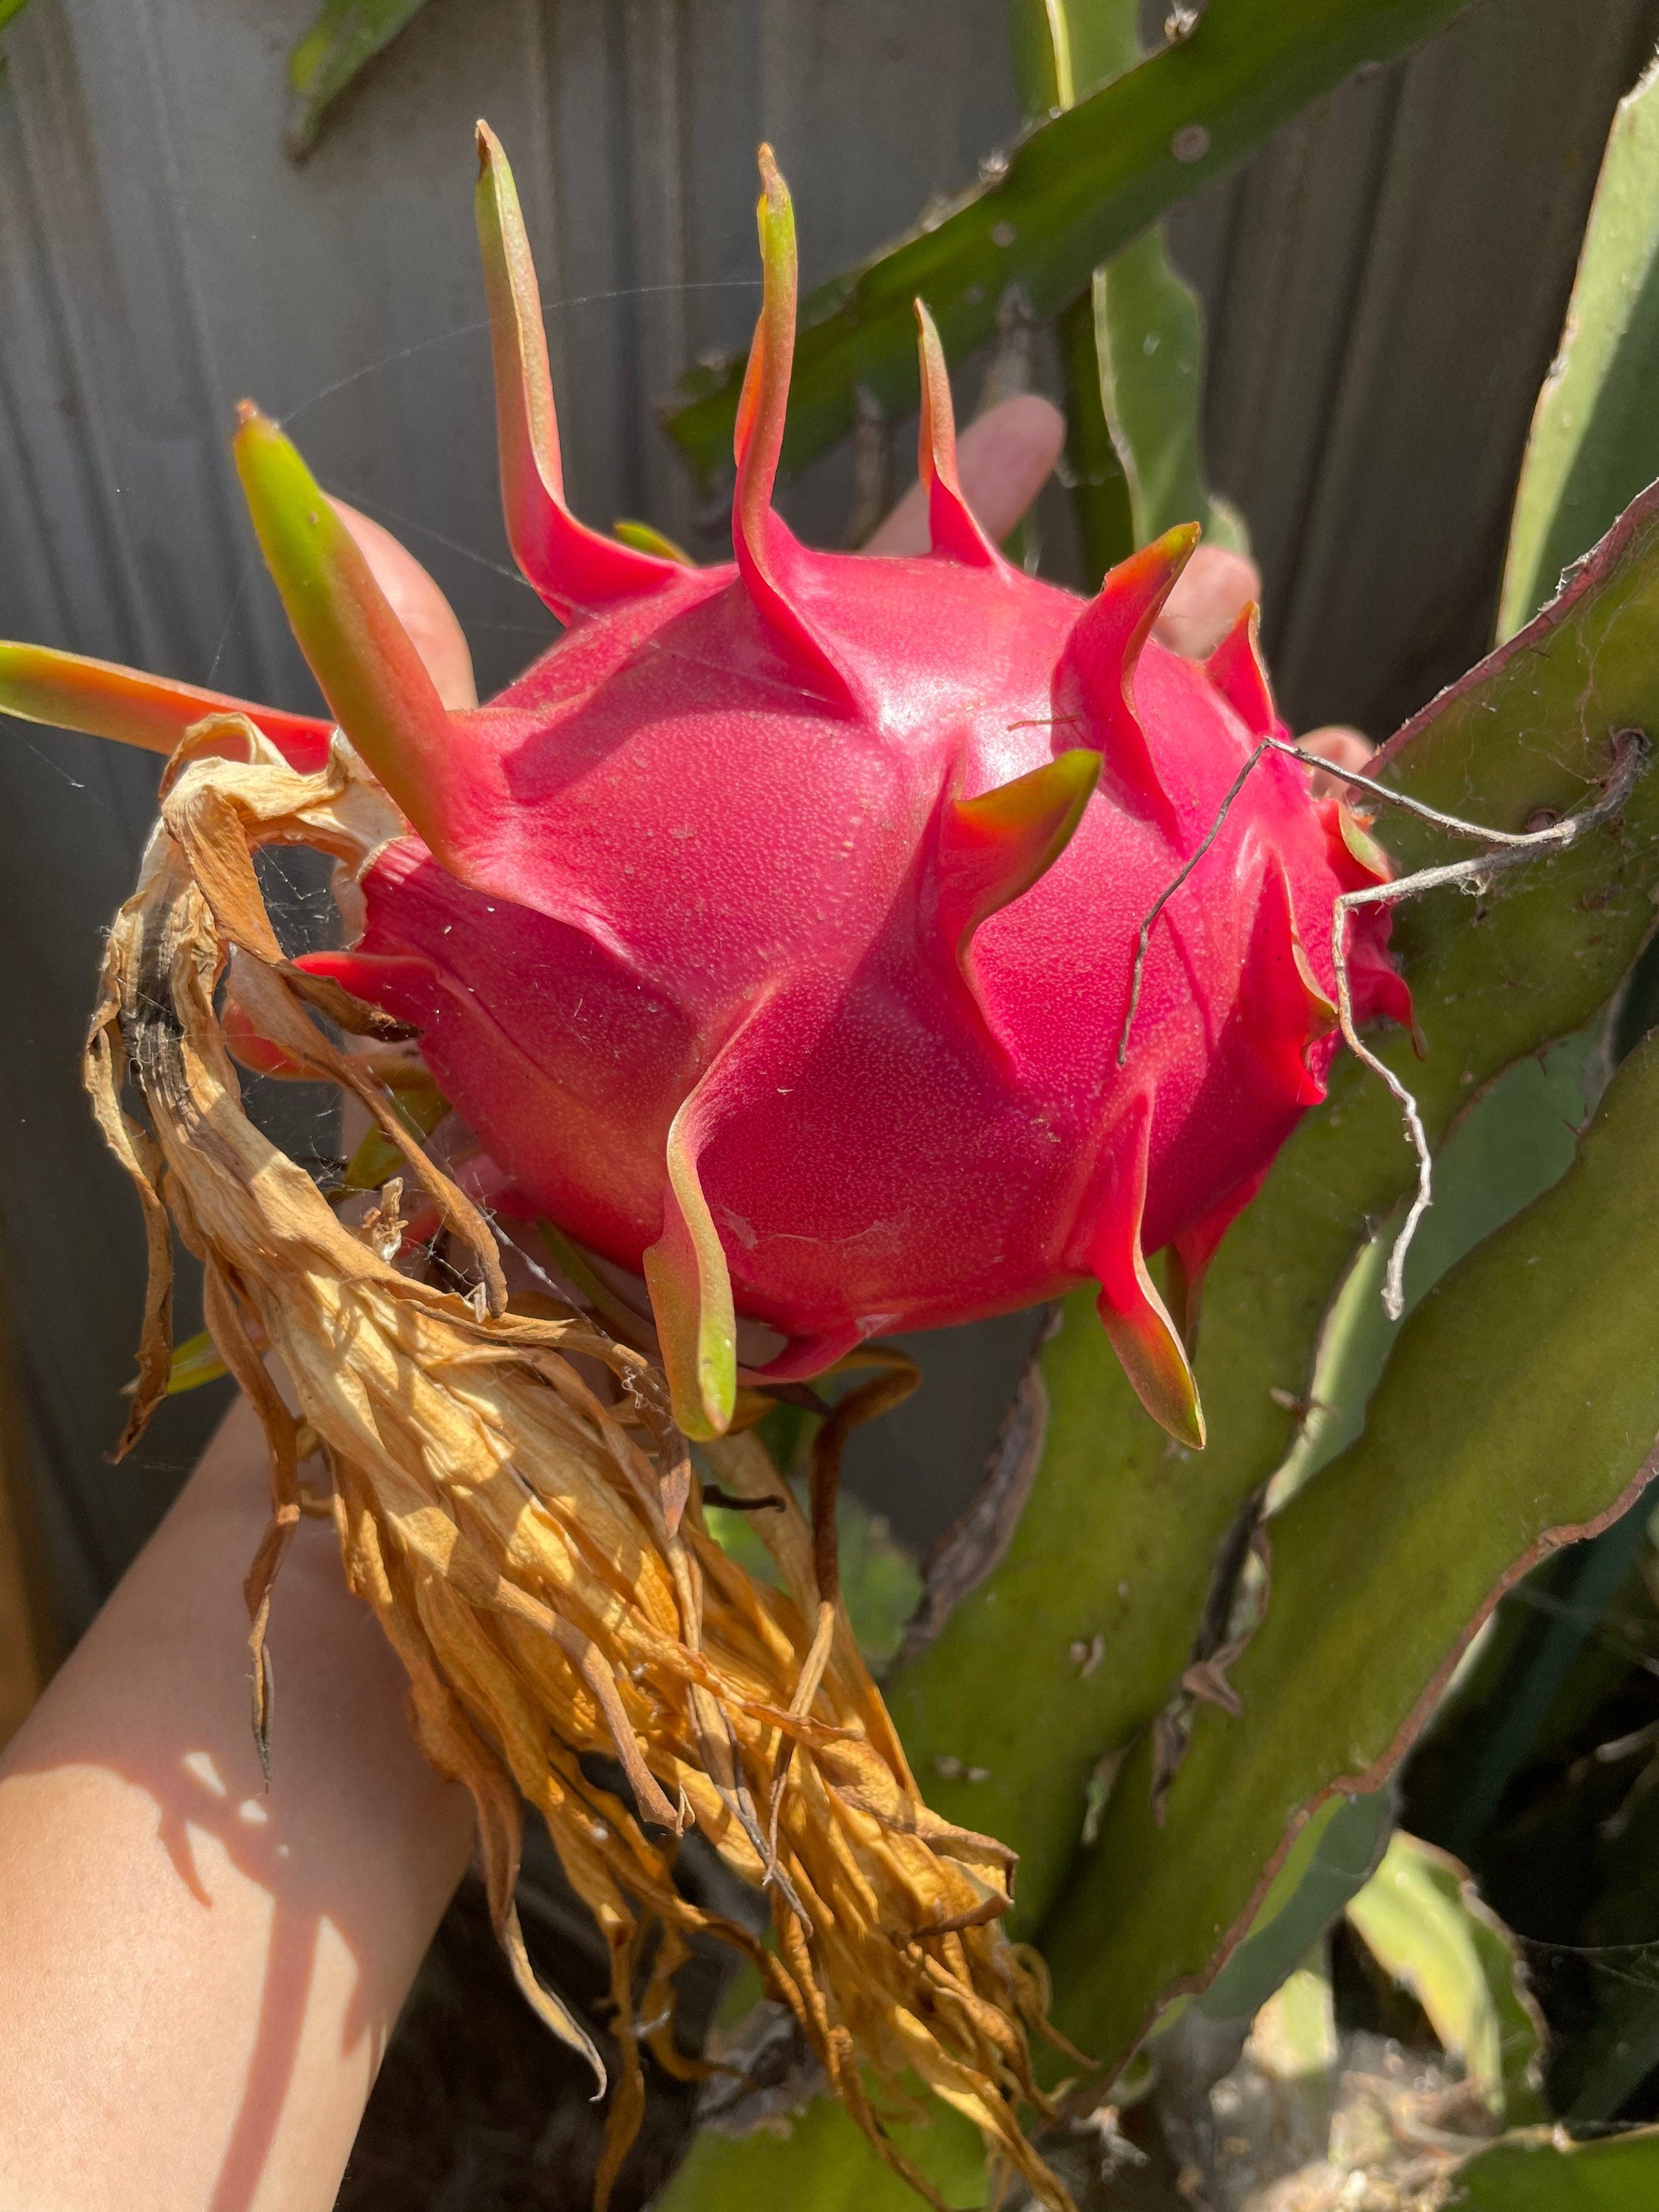 12 inch cutting white flesh dragon fruit-organic -actual fruit is pictured -will be able to fruit -self pollinating-large fruit-sweet